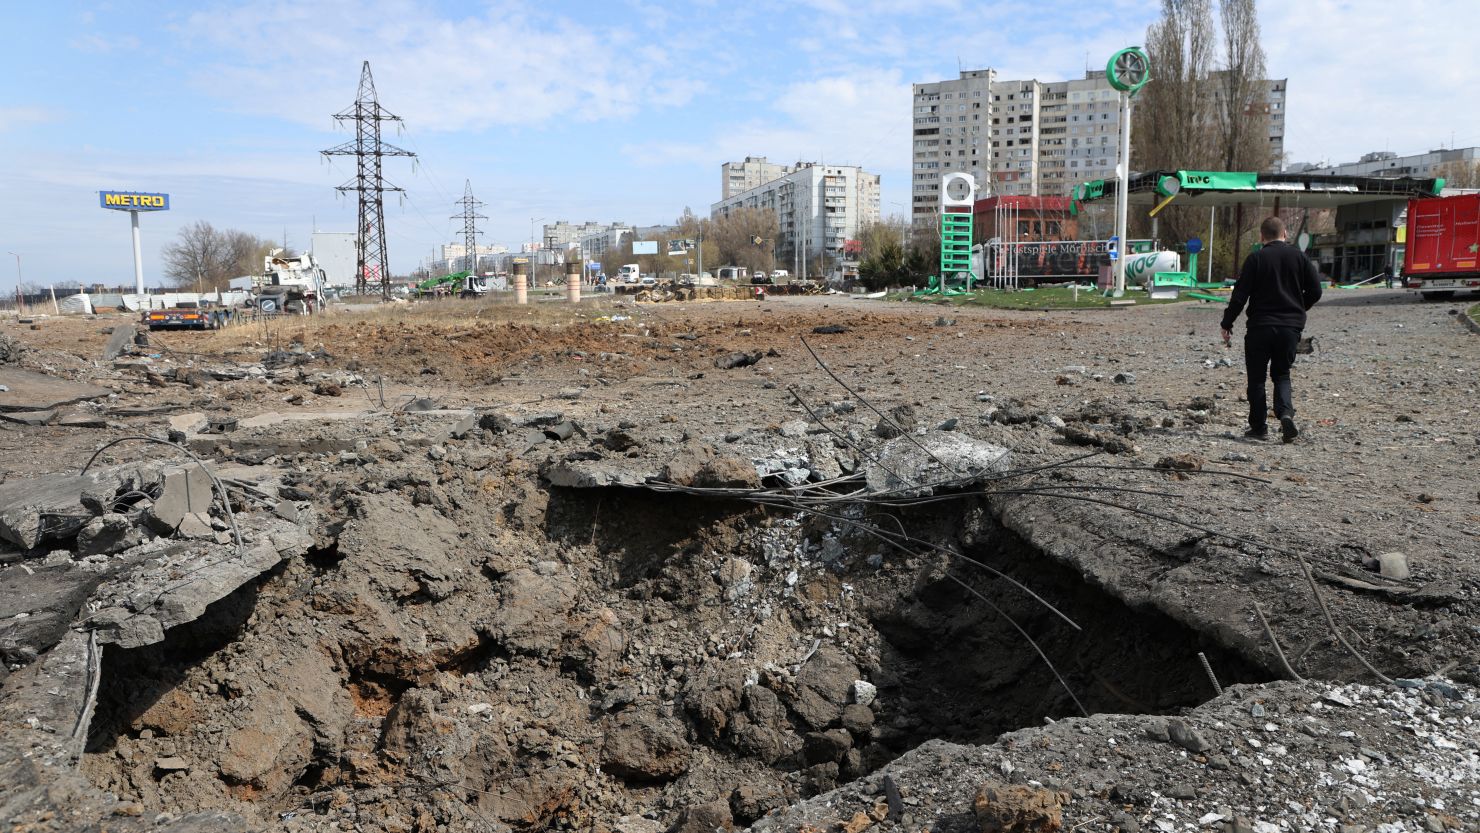 Kharkiv is Ukraine's second-largest city and has seen frequent deadly attacks.